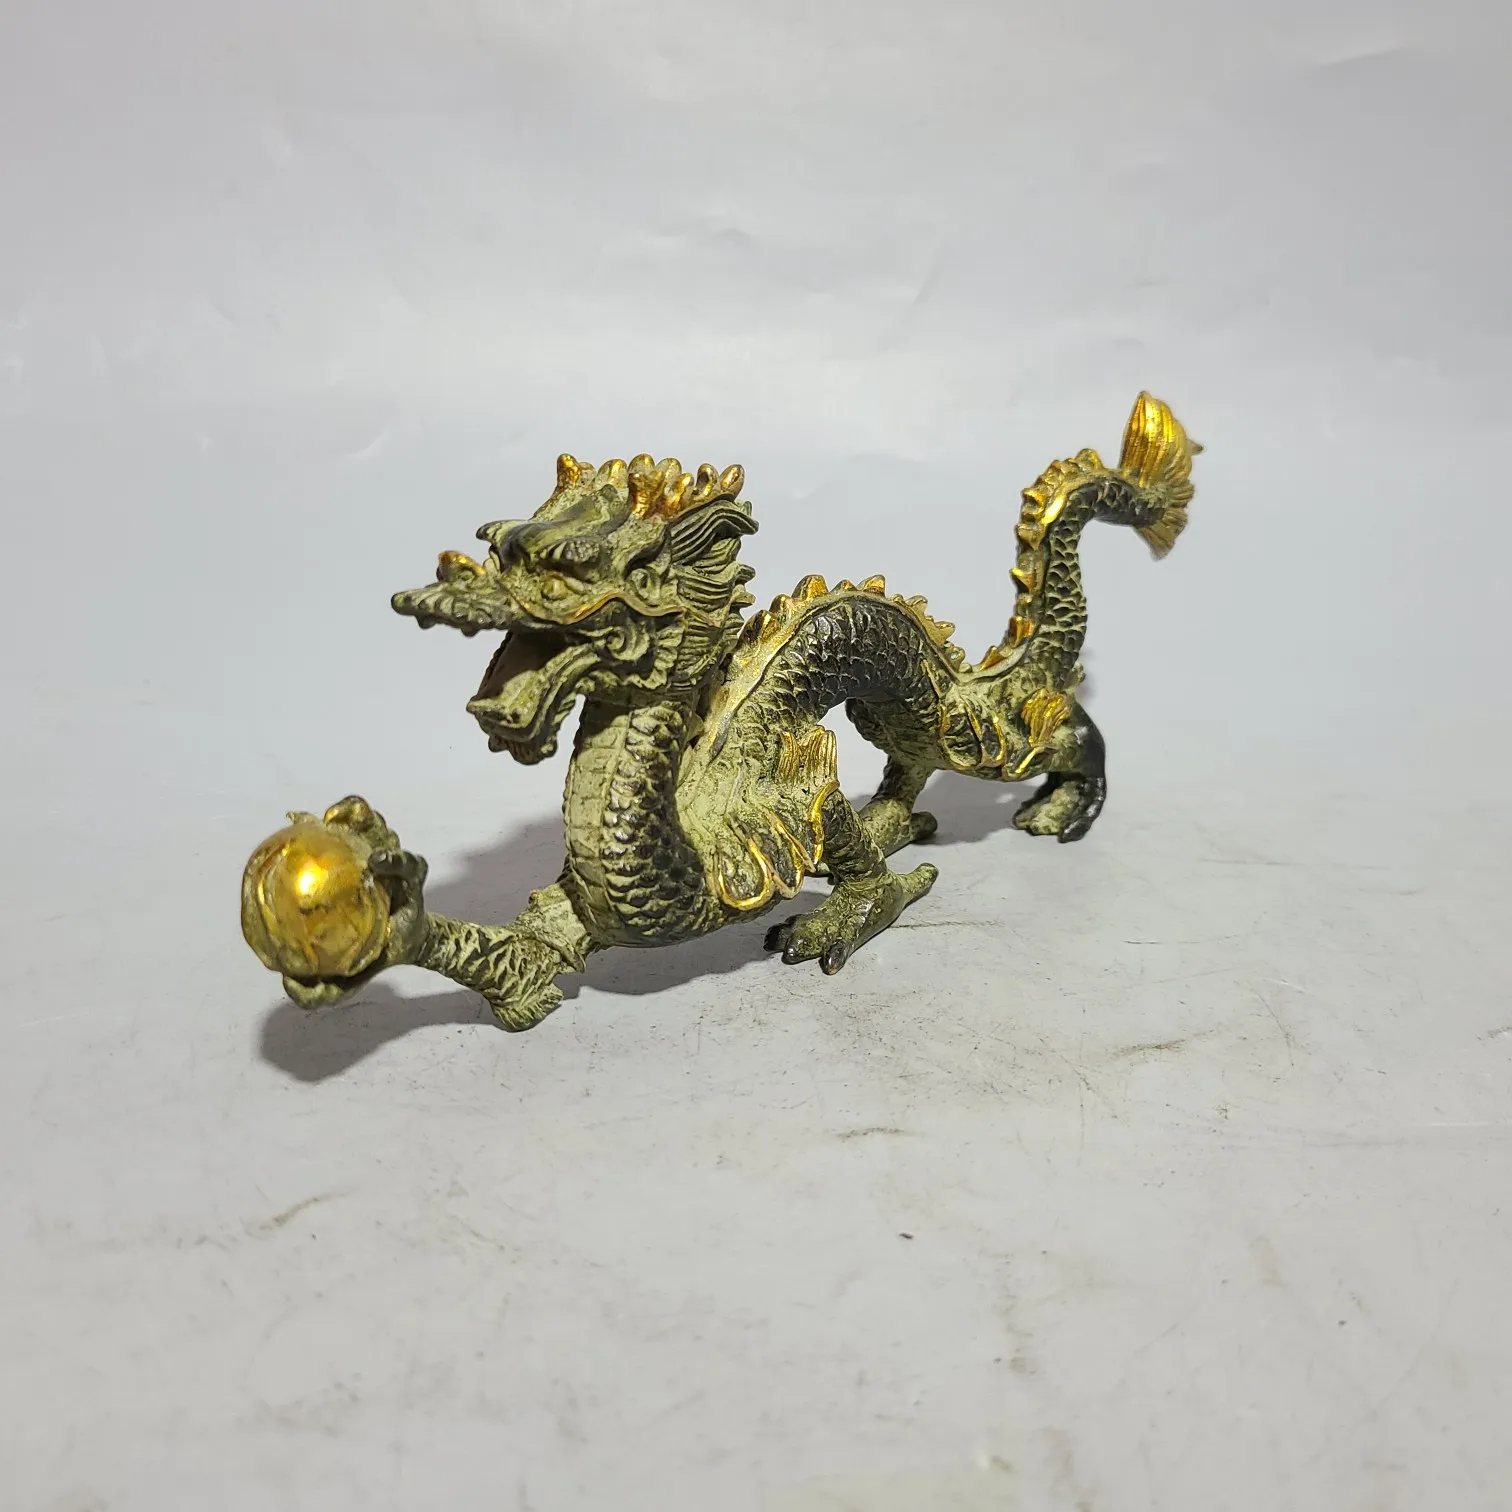 Exquisite antique furniture ornaments made of old bronze flying dragon playing with beads